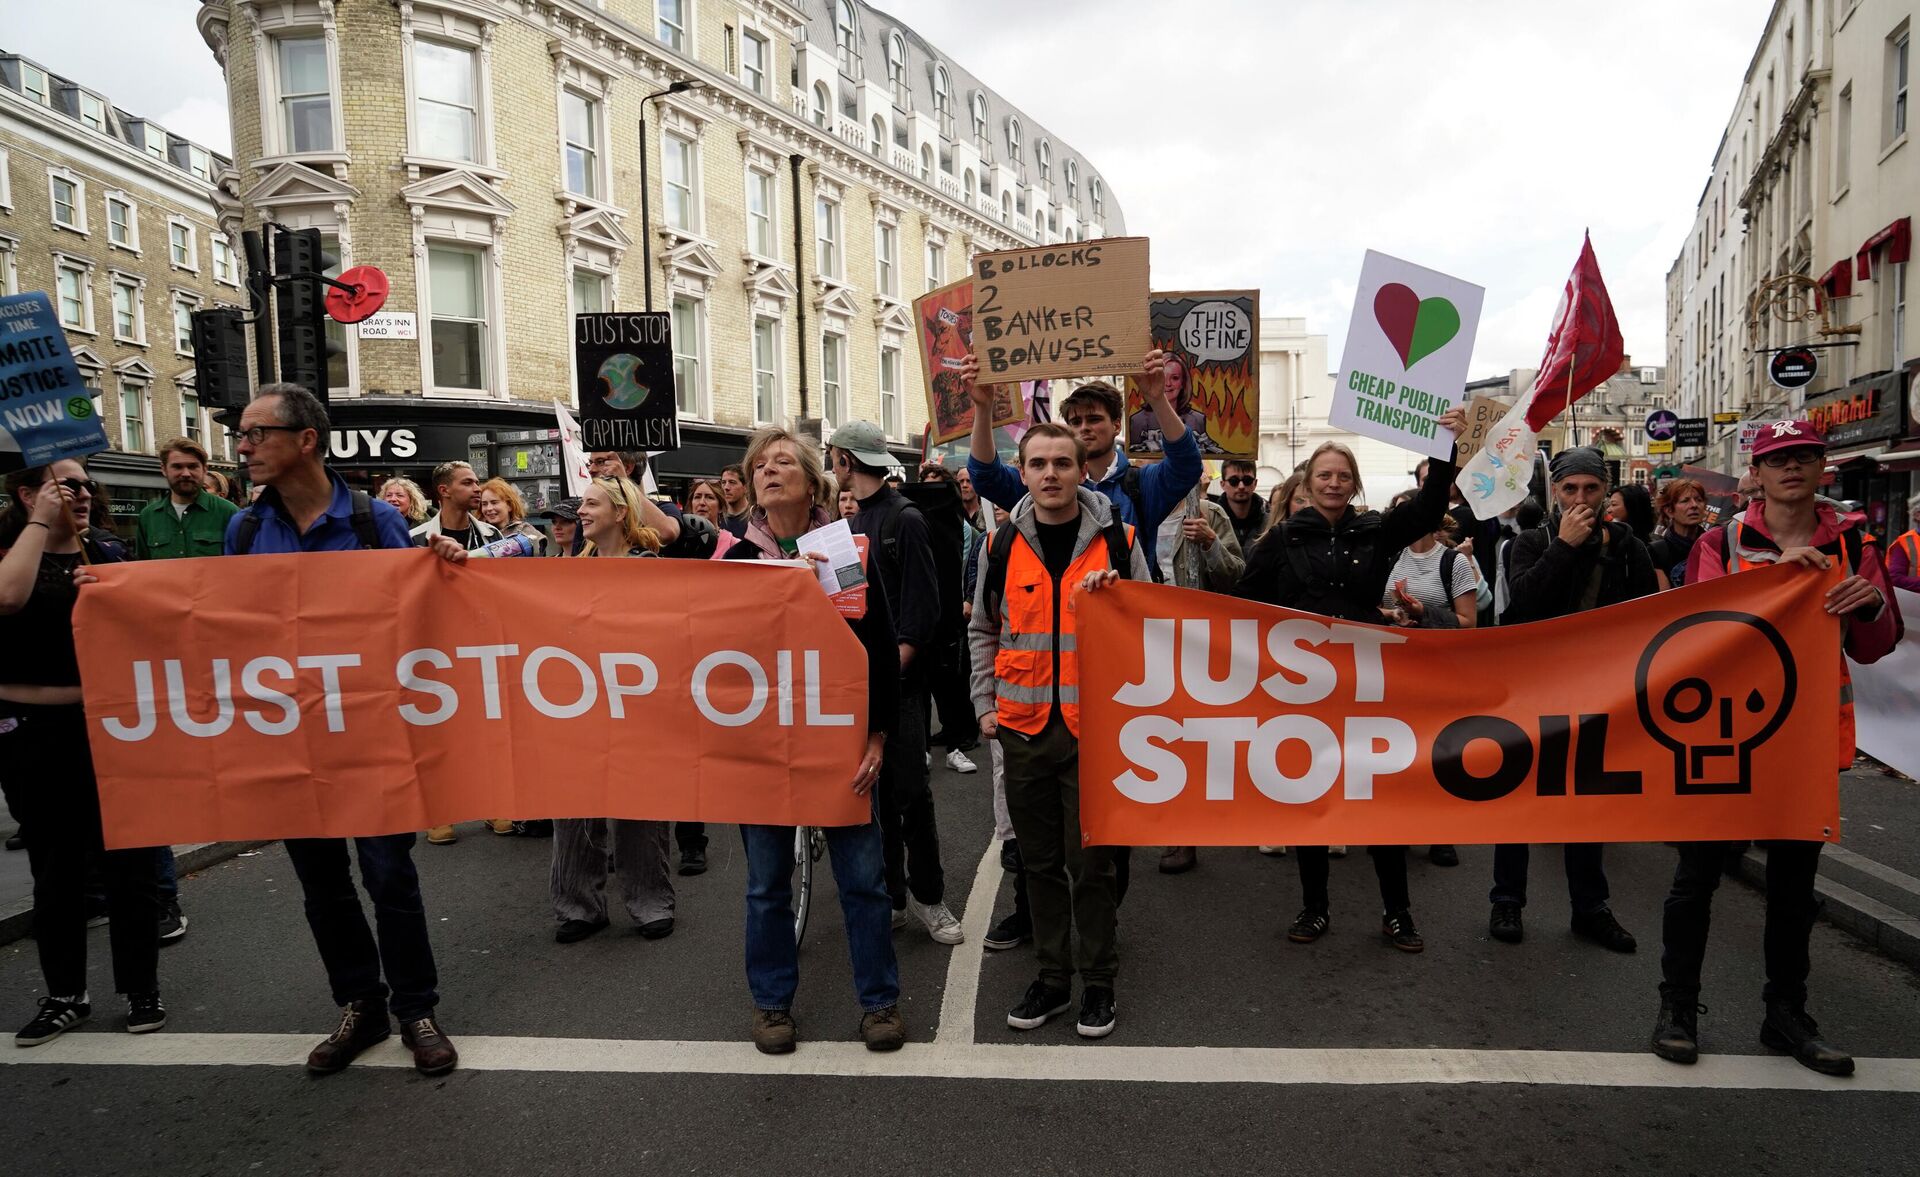 Protesters stand behind banners at a protest by Just Stop Oil climate activists in London on October 1, 2022. - Sputnik International, 1920, 28.10.2022